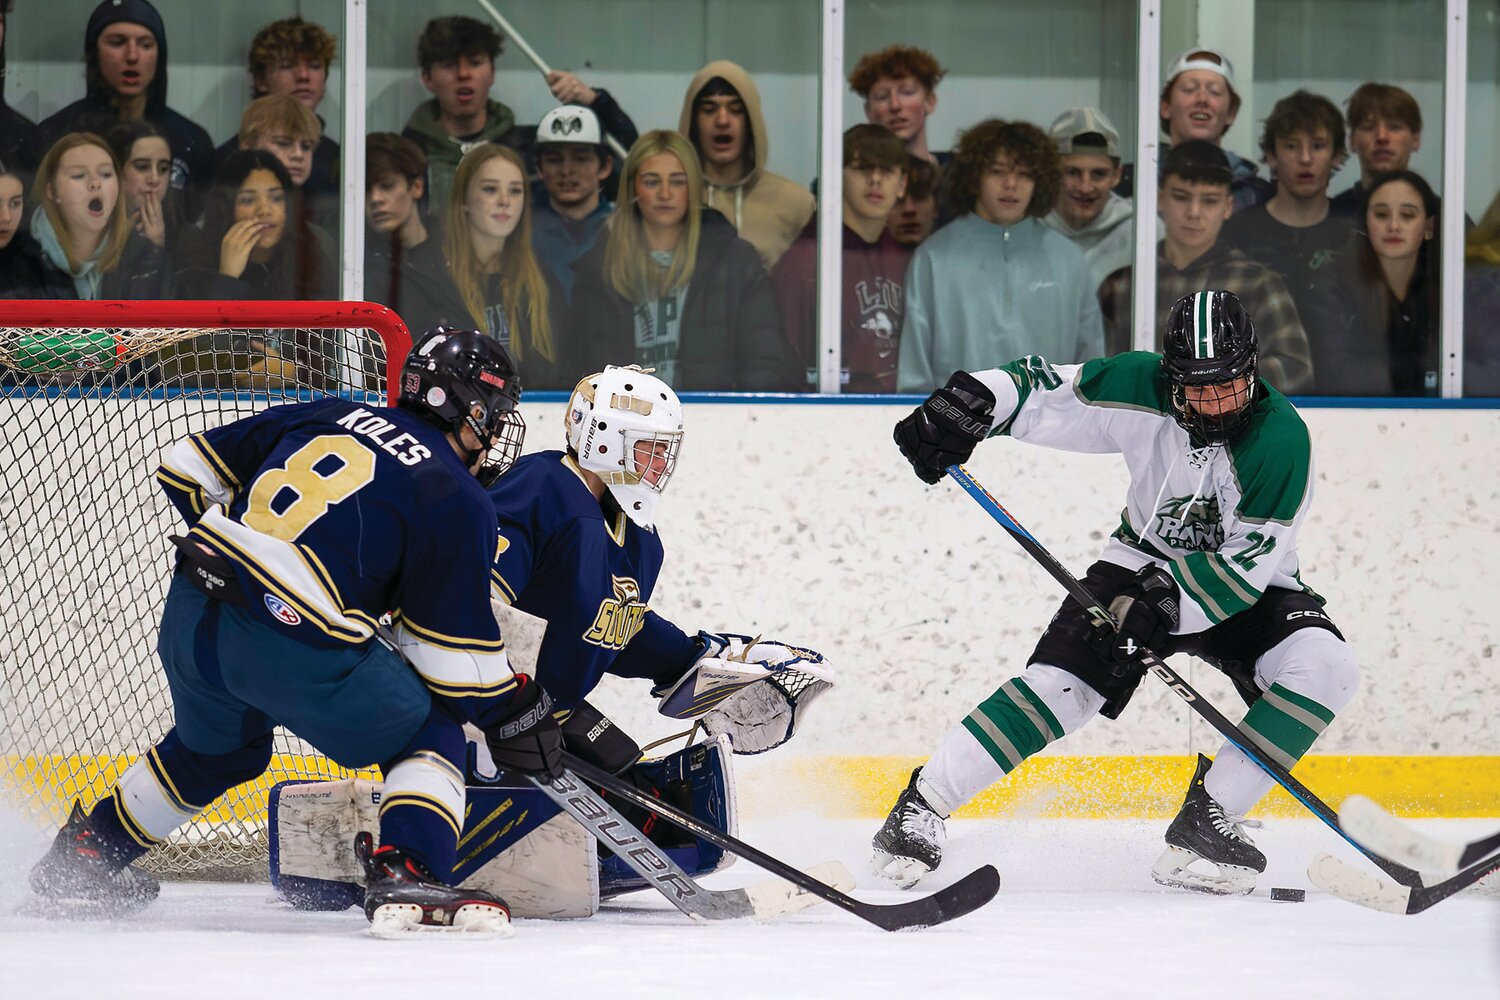 Pennridge’s Shane Dachowski gets stopped while trying to get a shot off in front of Council Rock South’s Kevin Koles and goalie Trevor Rakszawski during the Suburban High School Hockey League final.